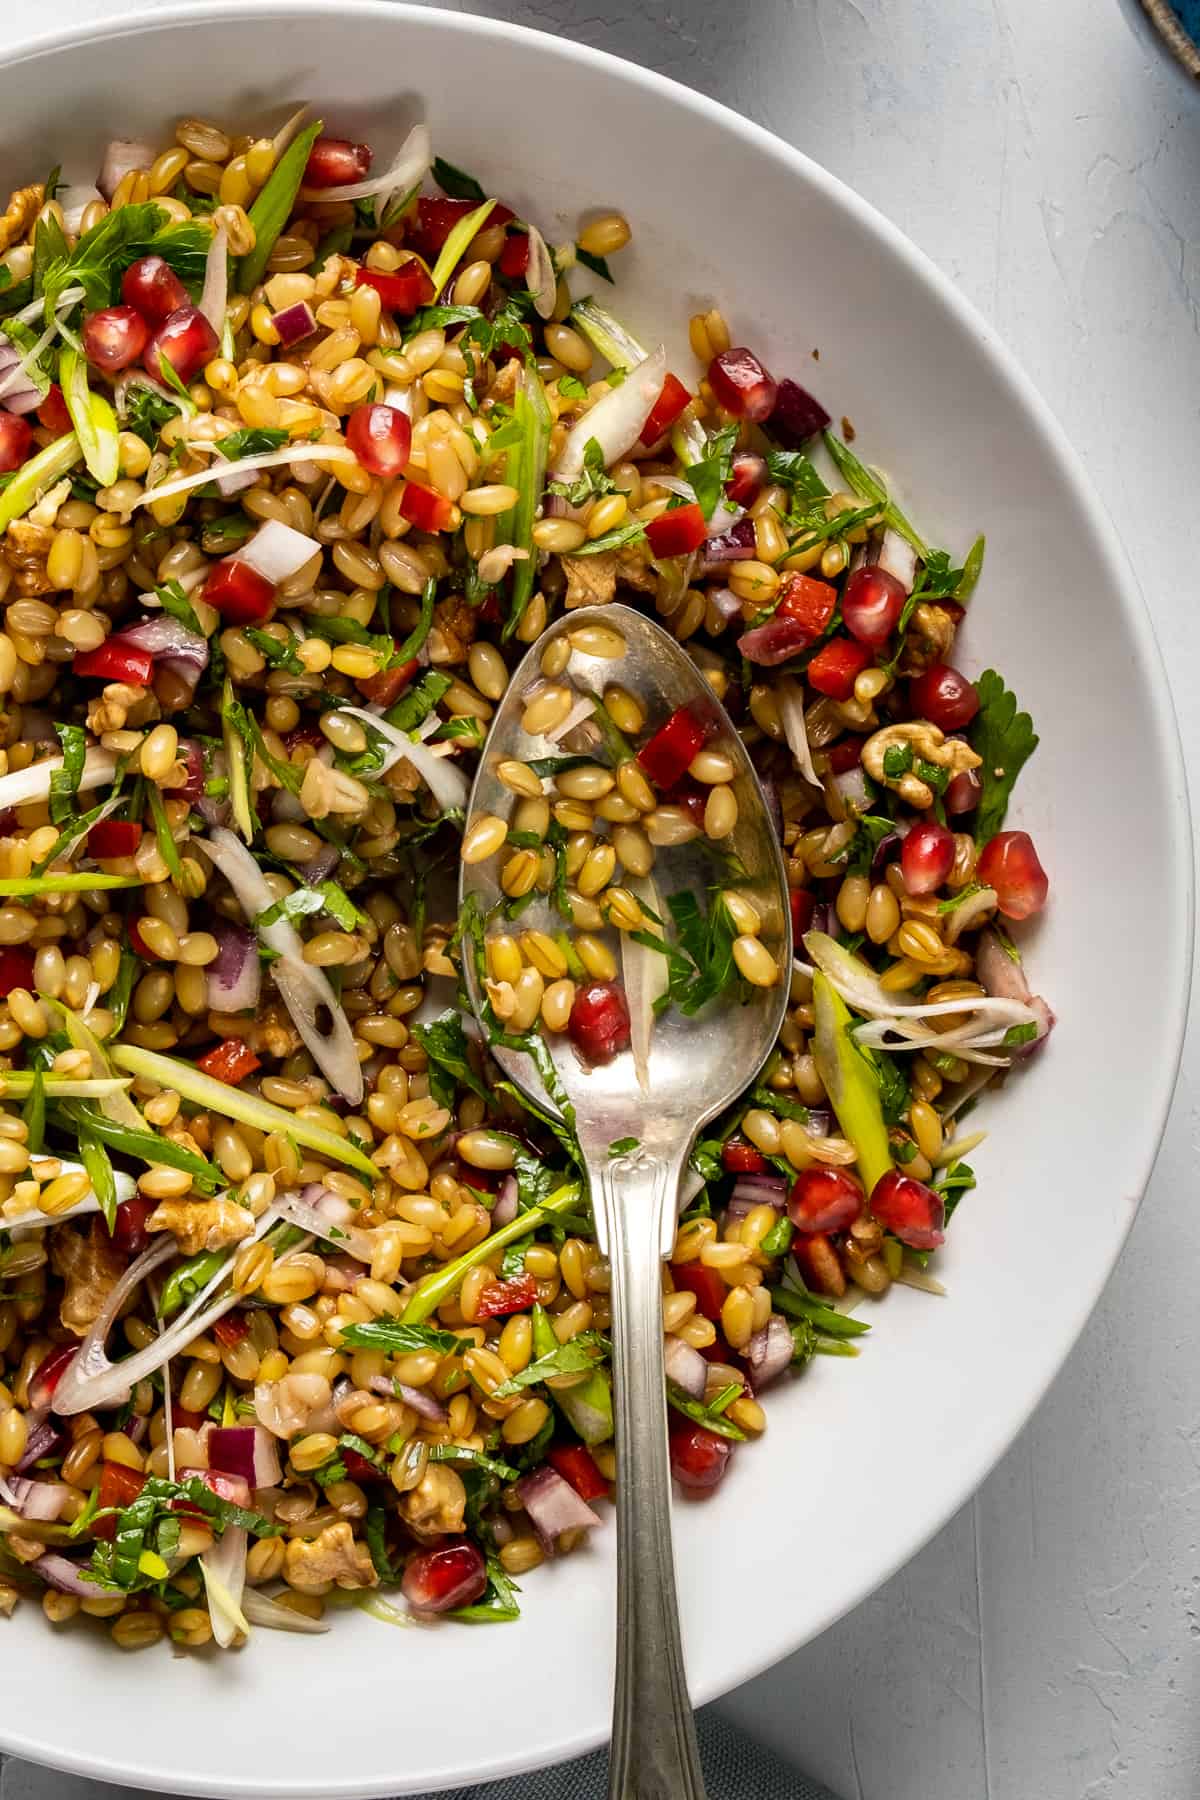 Wheat berry salad with greens and pomegranate arils in a white bowl and a spoon inside it.